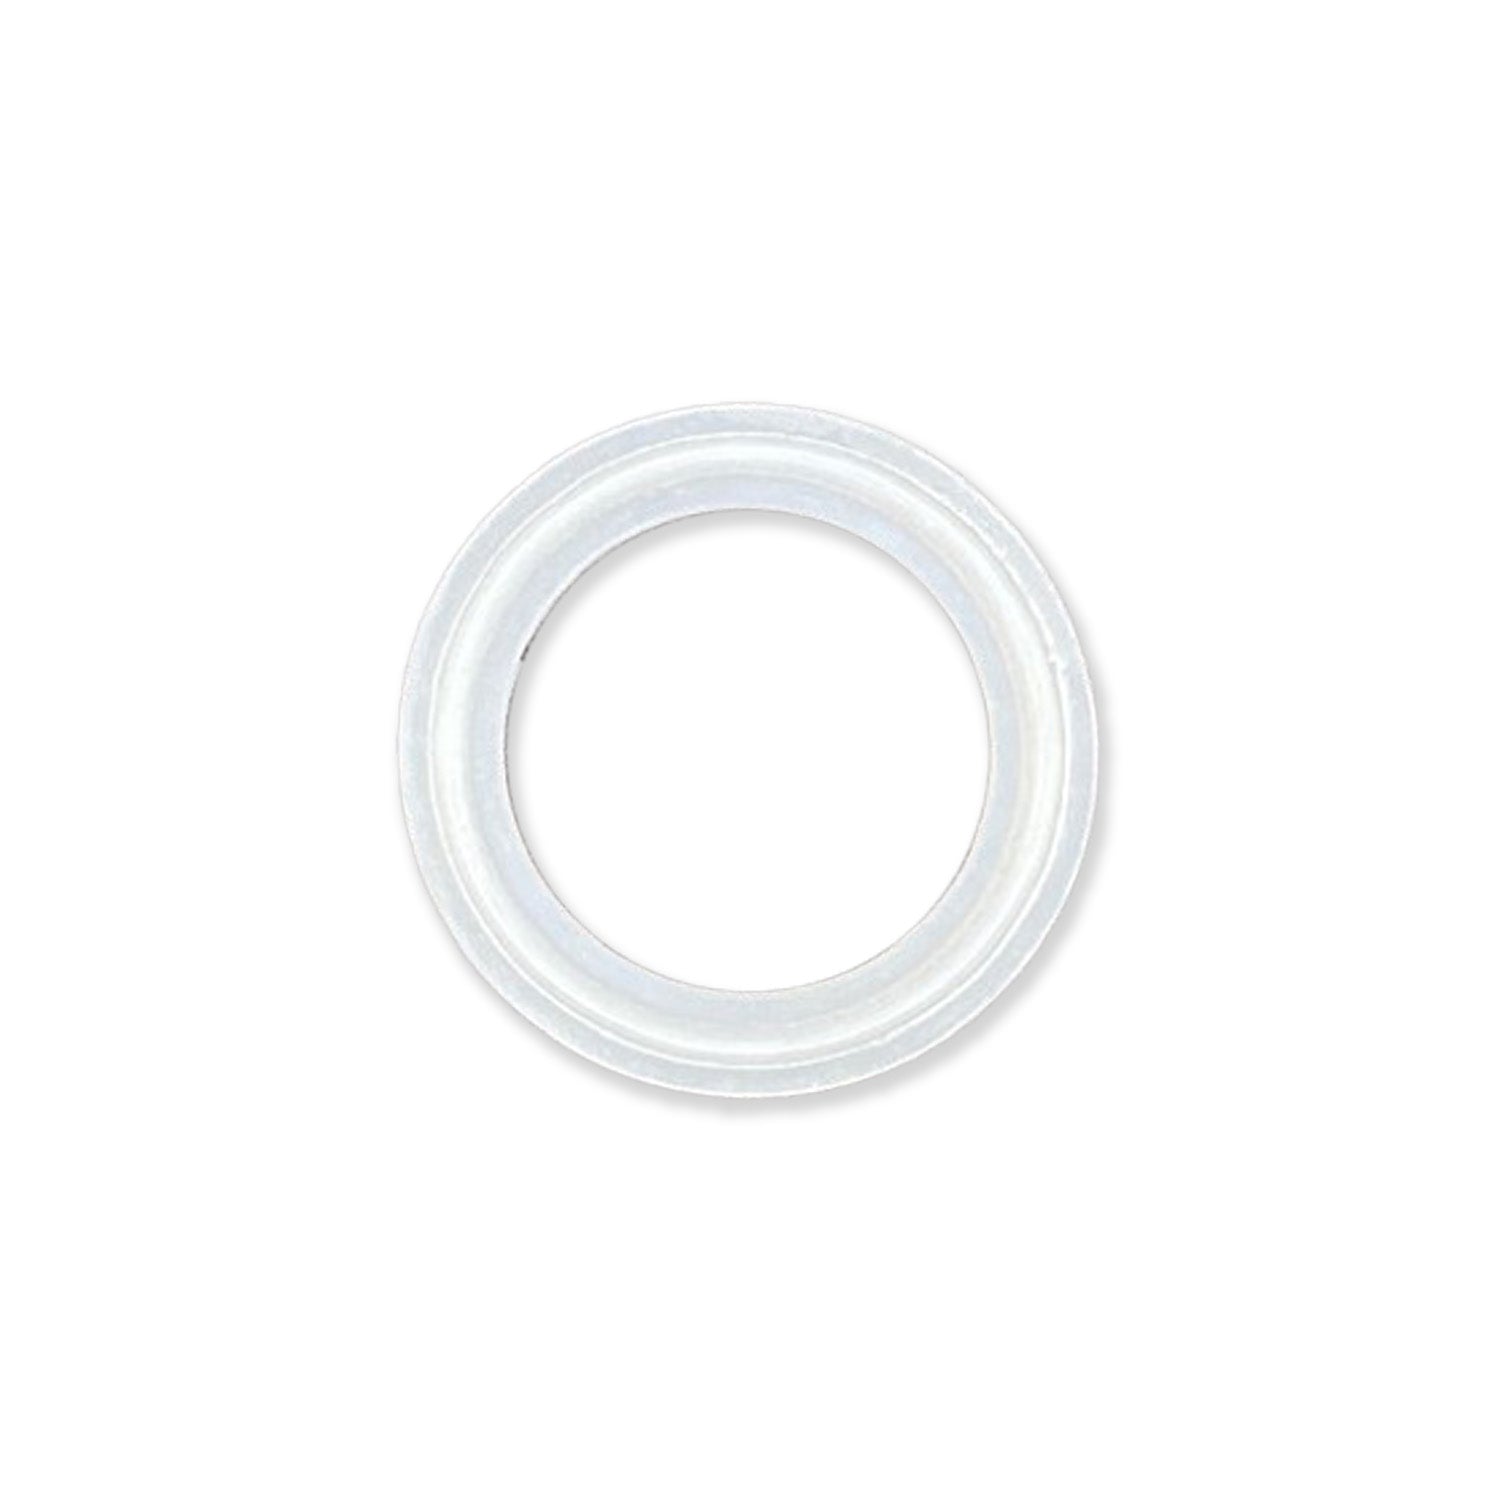 1.5" Tri-Clamp Gasket, Silicone, clear